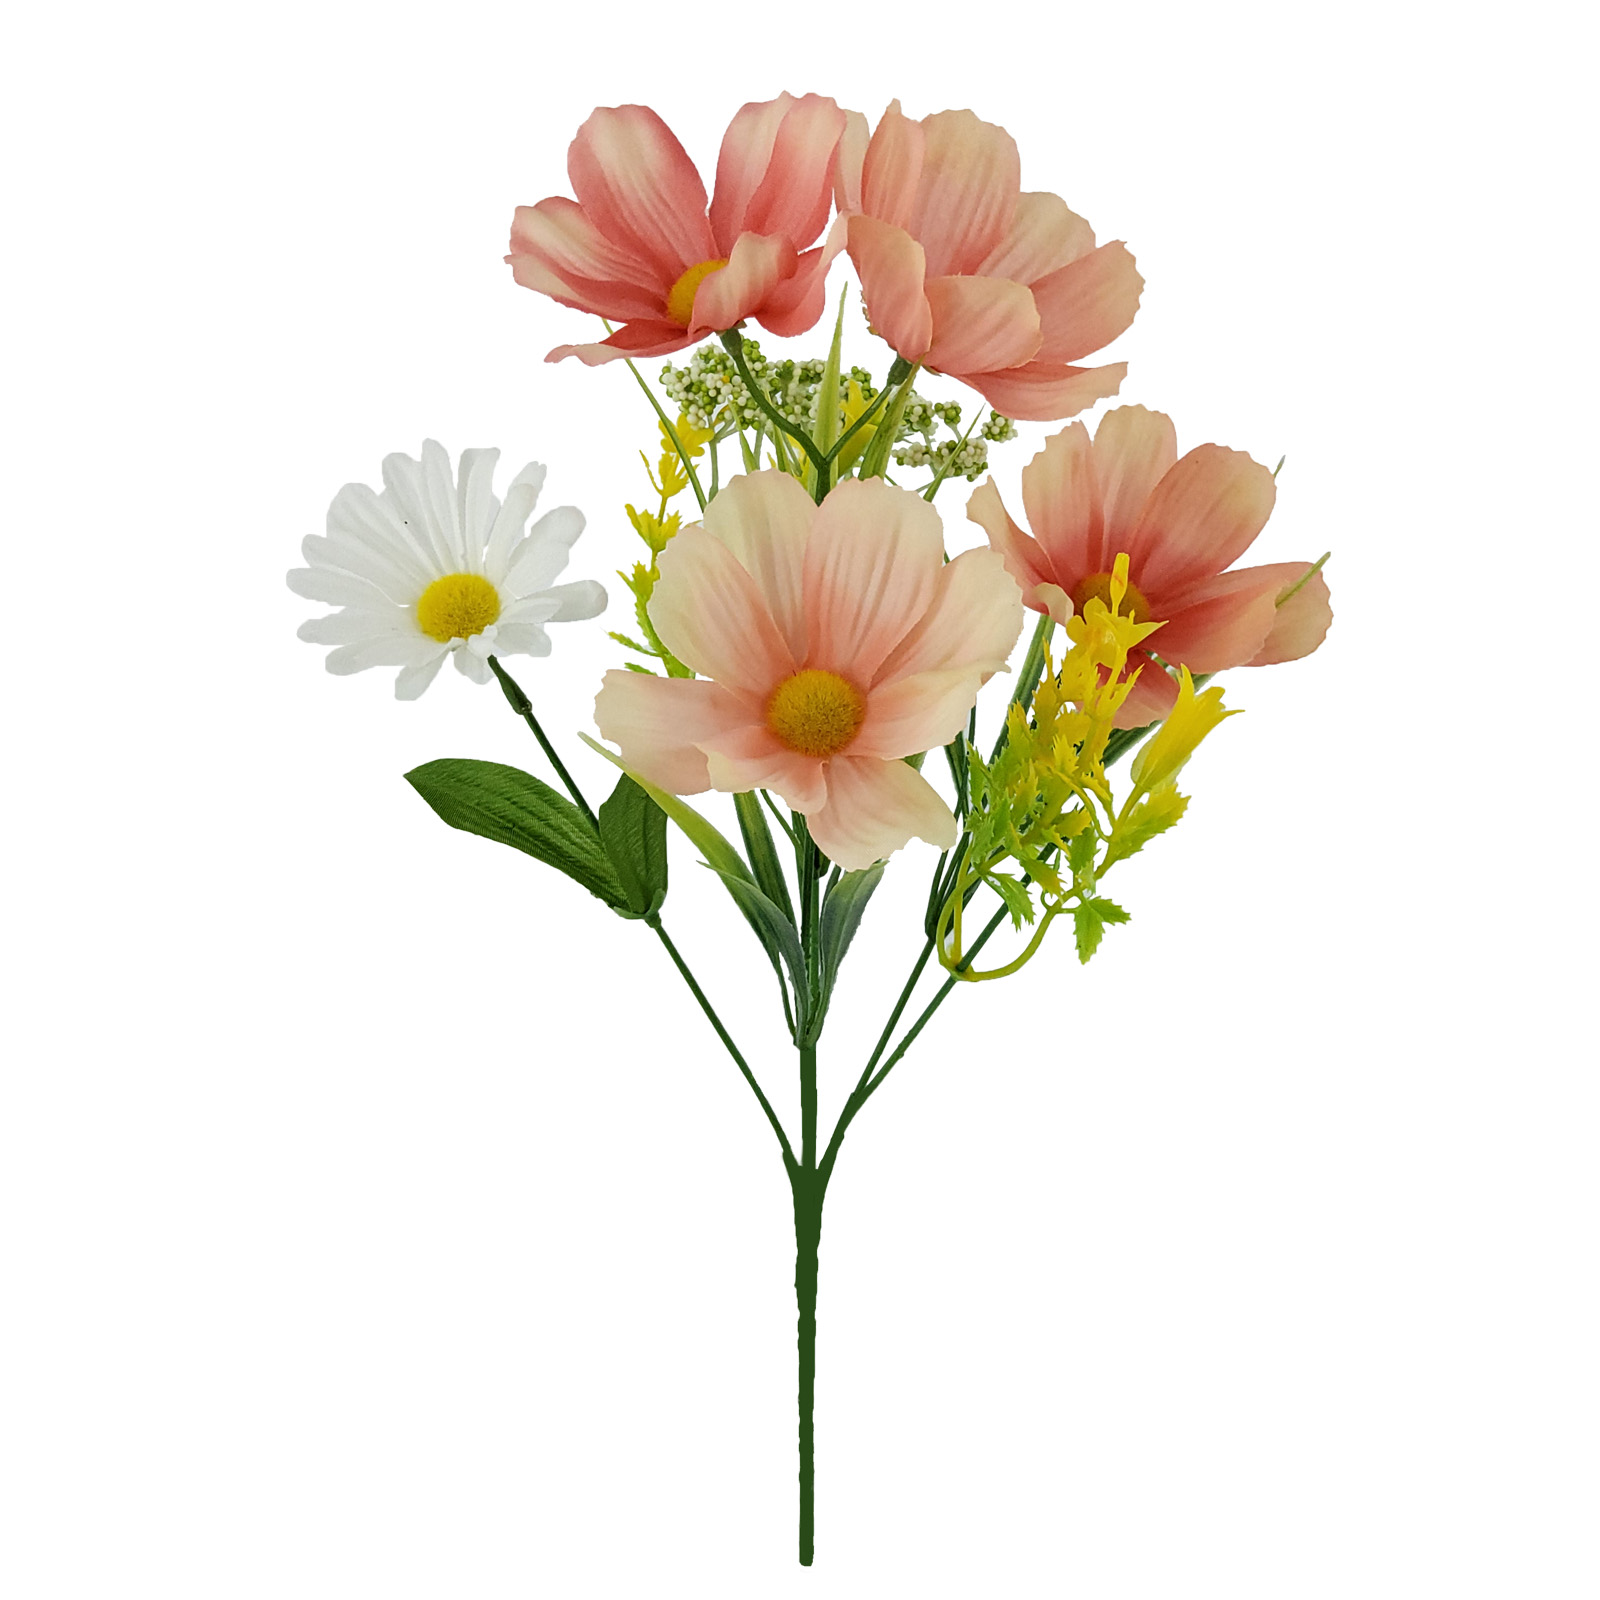 Mainstays 13.5" Indoor Artificial Cosmos Floral Mix Pick, Pink Color. - image 1 of 5